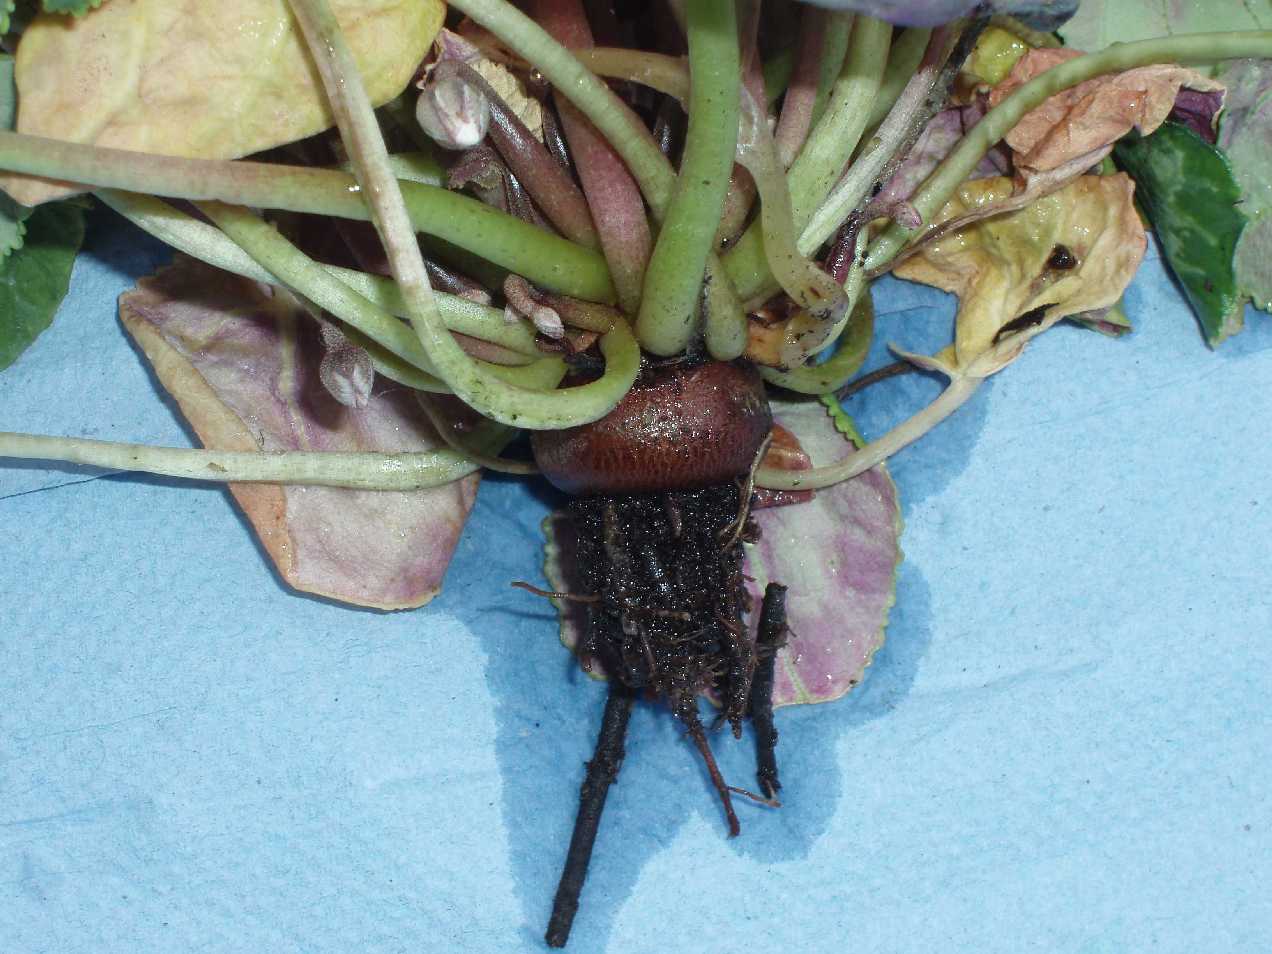 Rhizoctonia root loss. Courtesy and copyright of ADAS Horticulture.